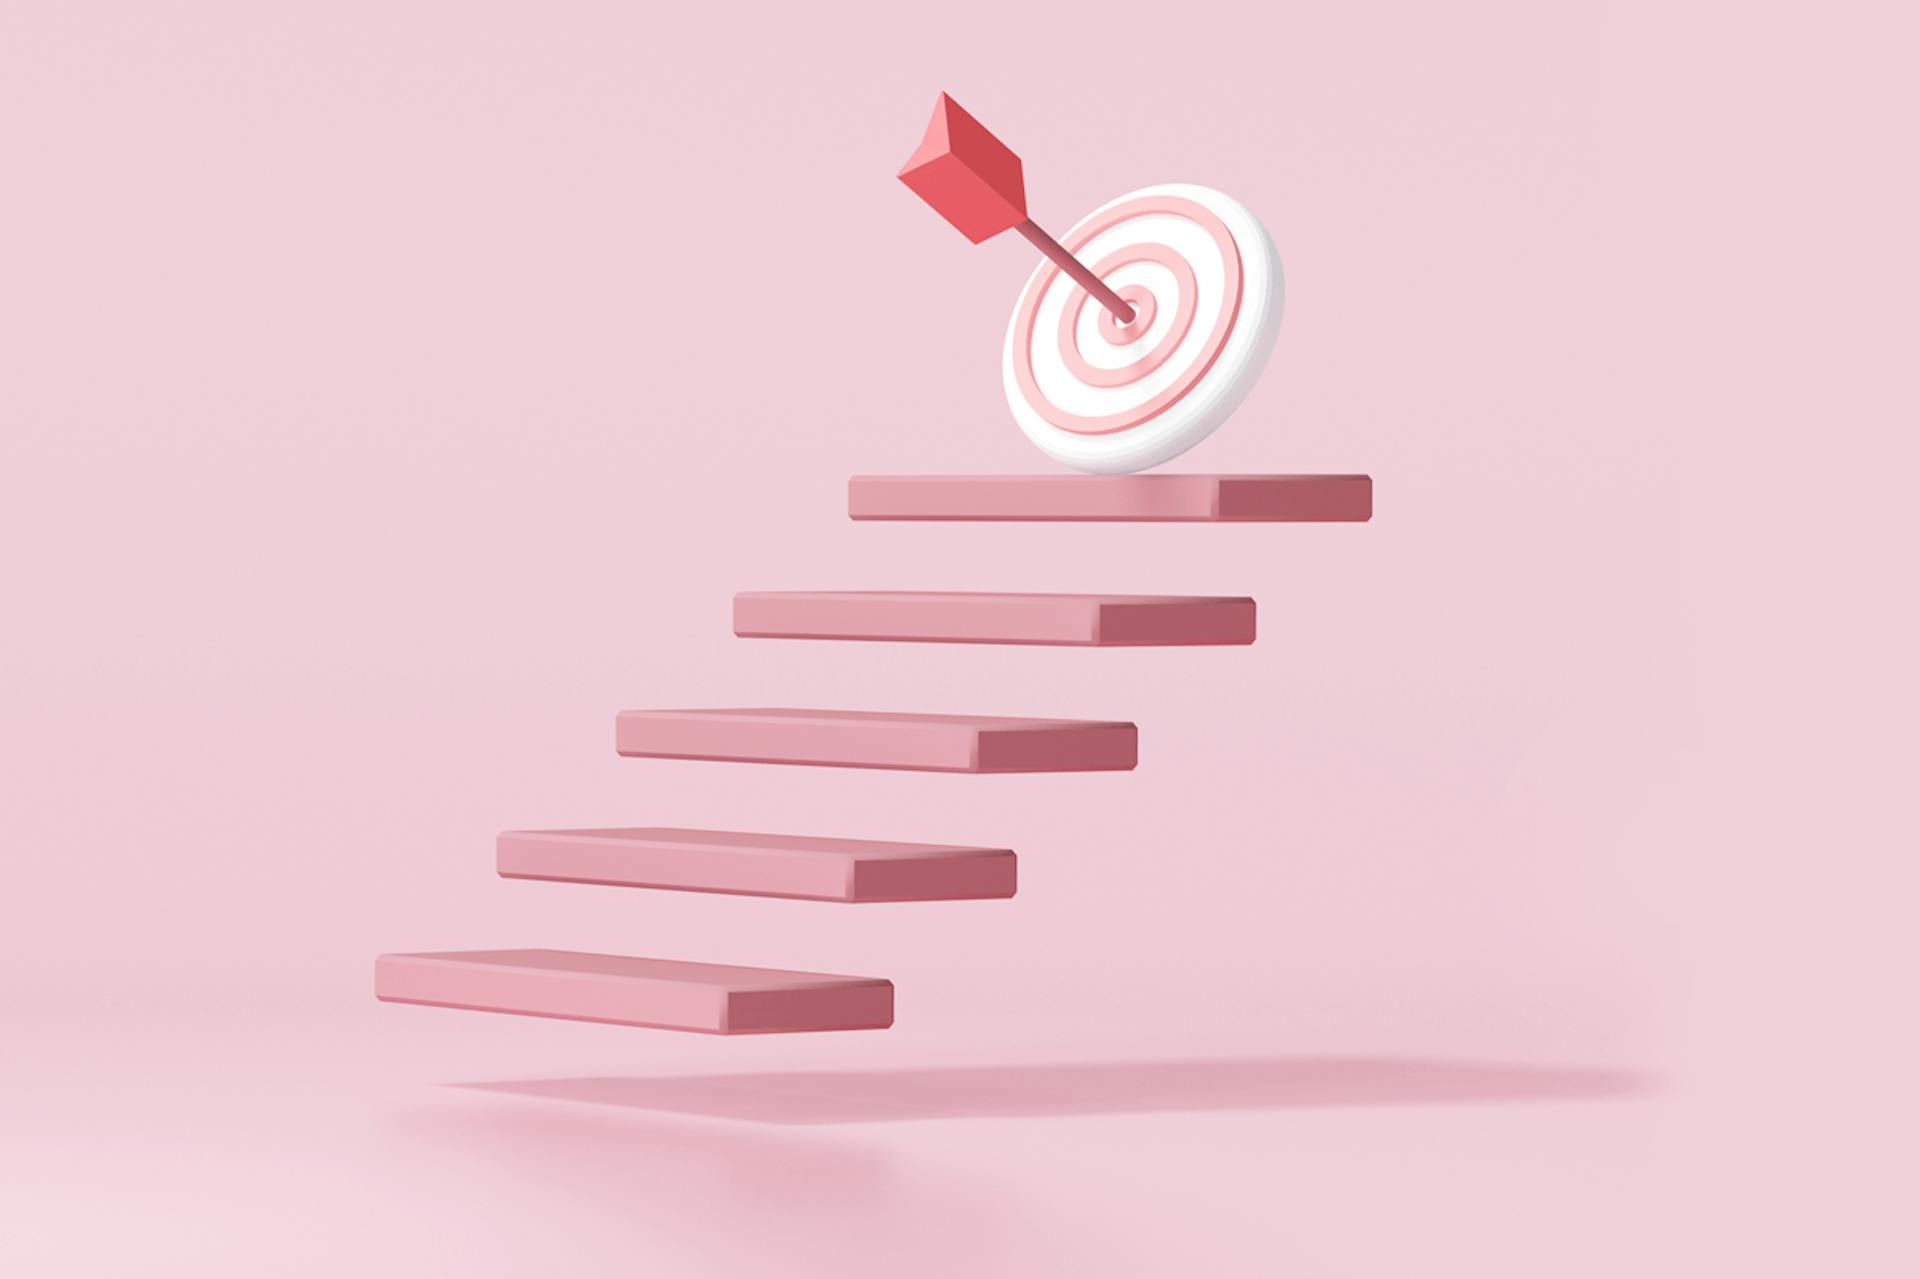 Image showing a floating pink staircase leading up to a target with an arrow in the bullseye, on a pale pink background. Achieving Instagram impressions and reach blog post